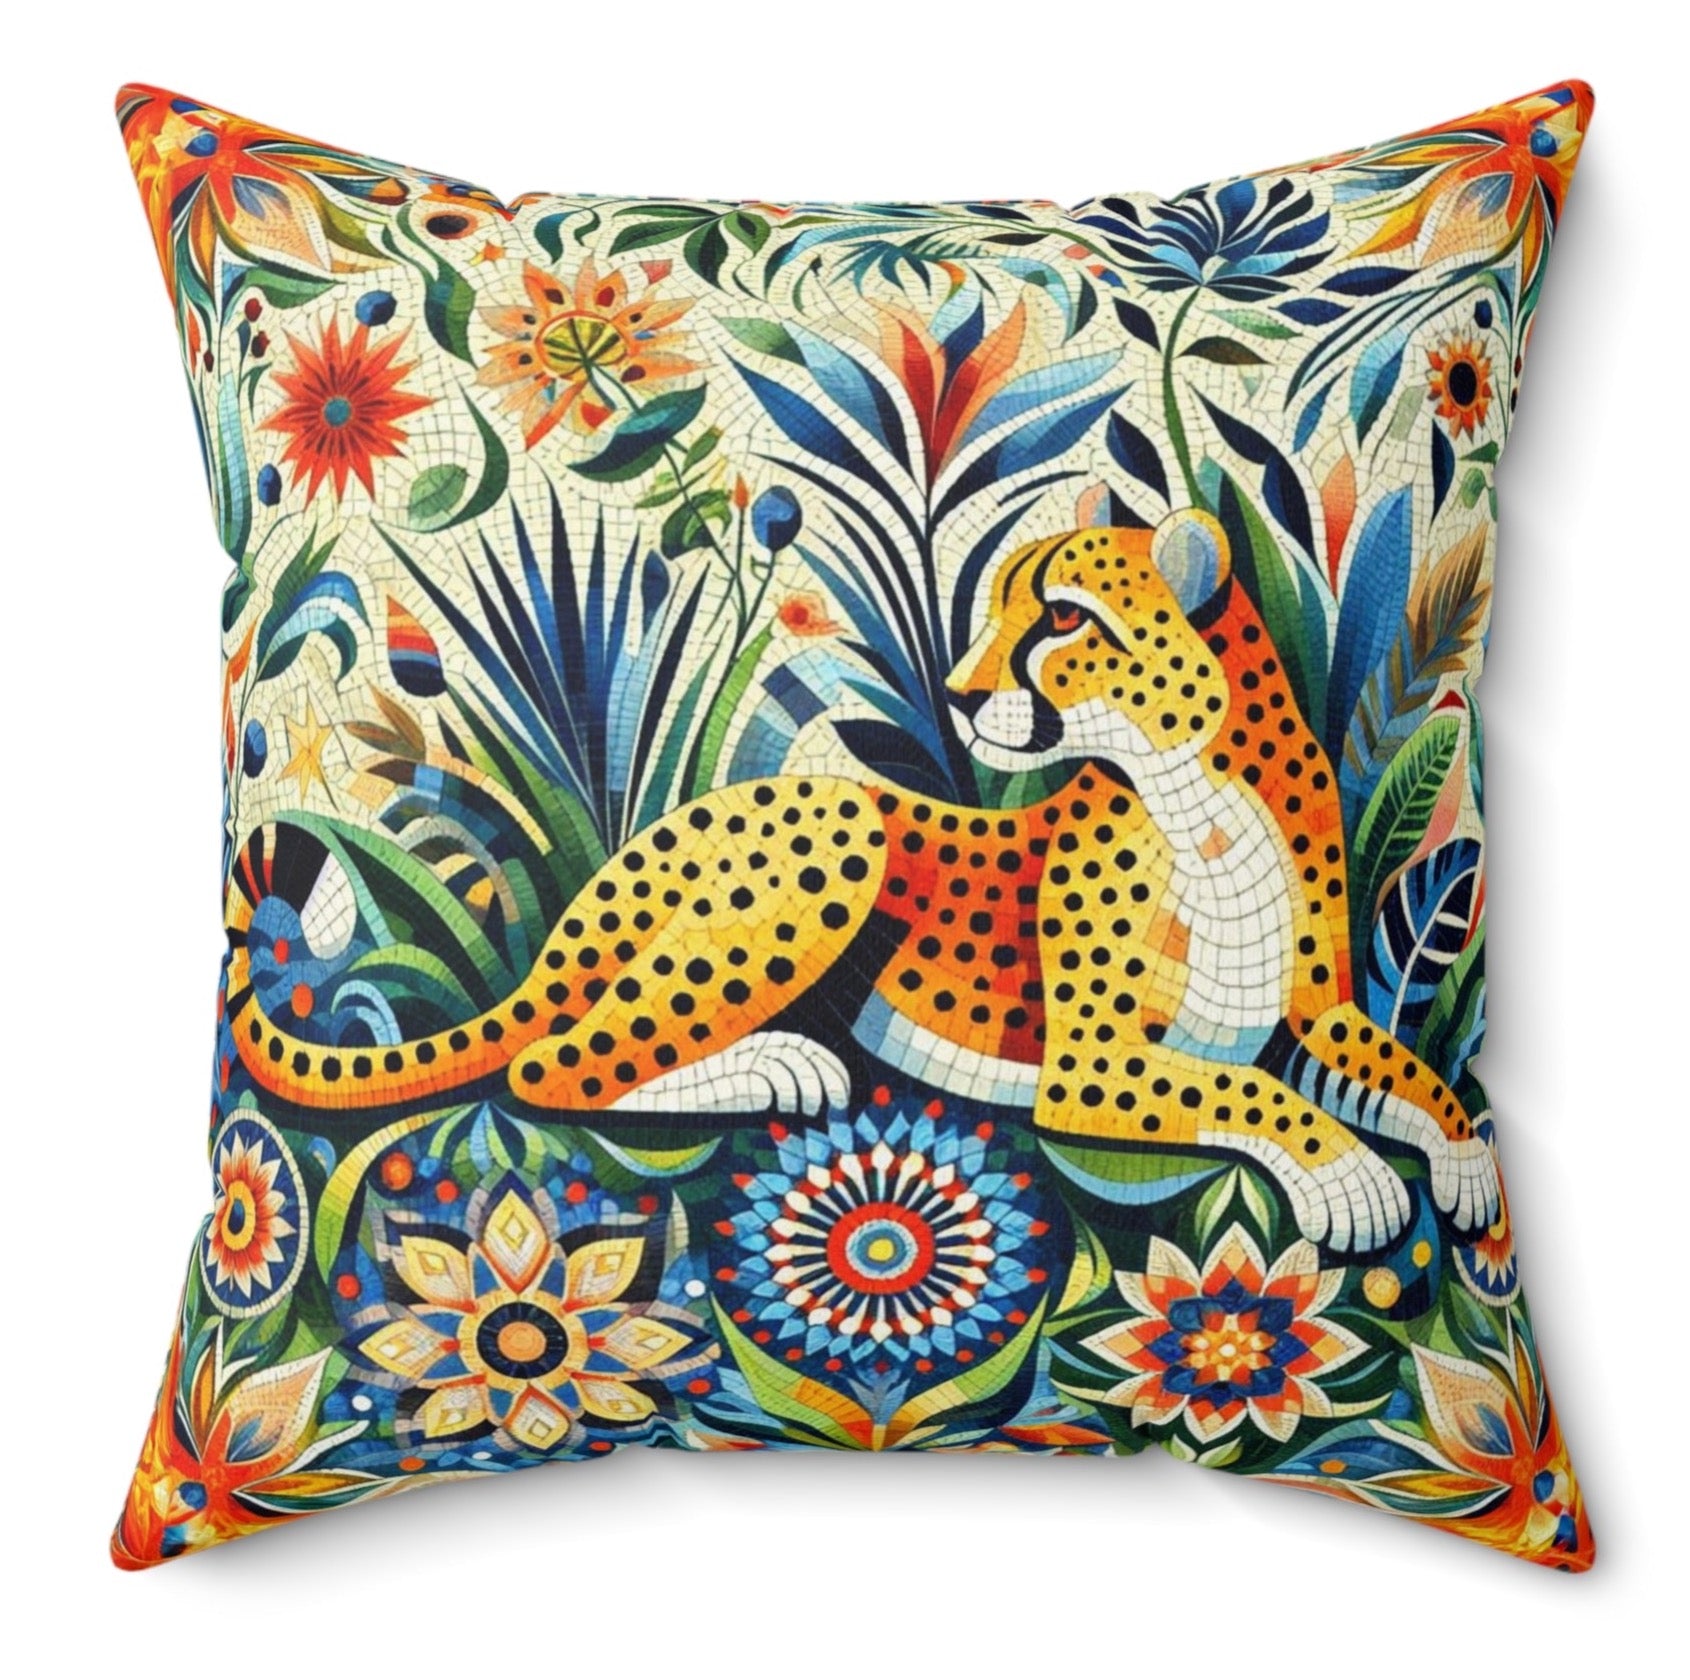 Eclectic Retro Cheetah Vintage Throw Pillow Polyester Decorative Botanical Maximalist Cushion Square Cover